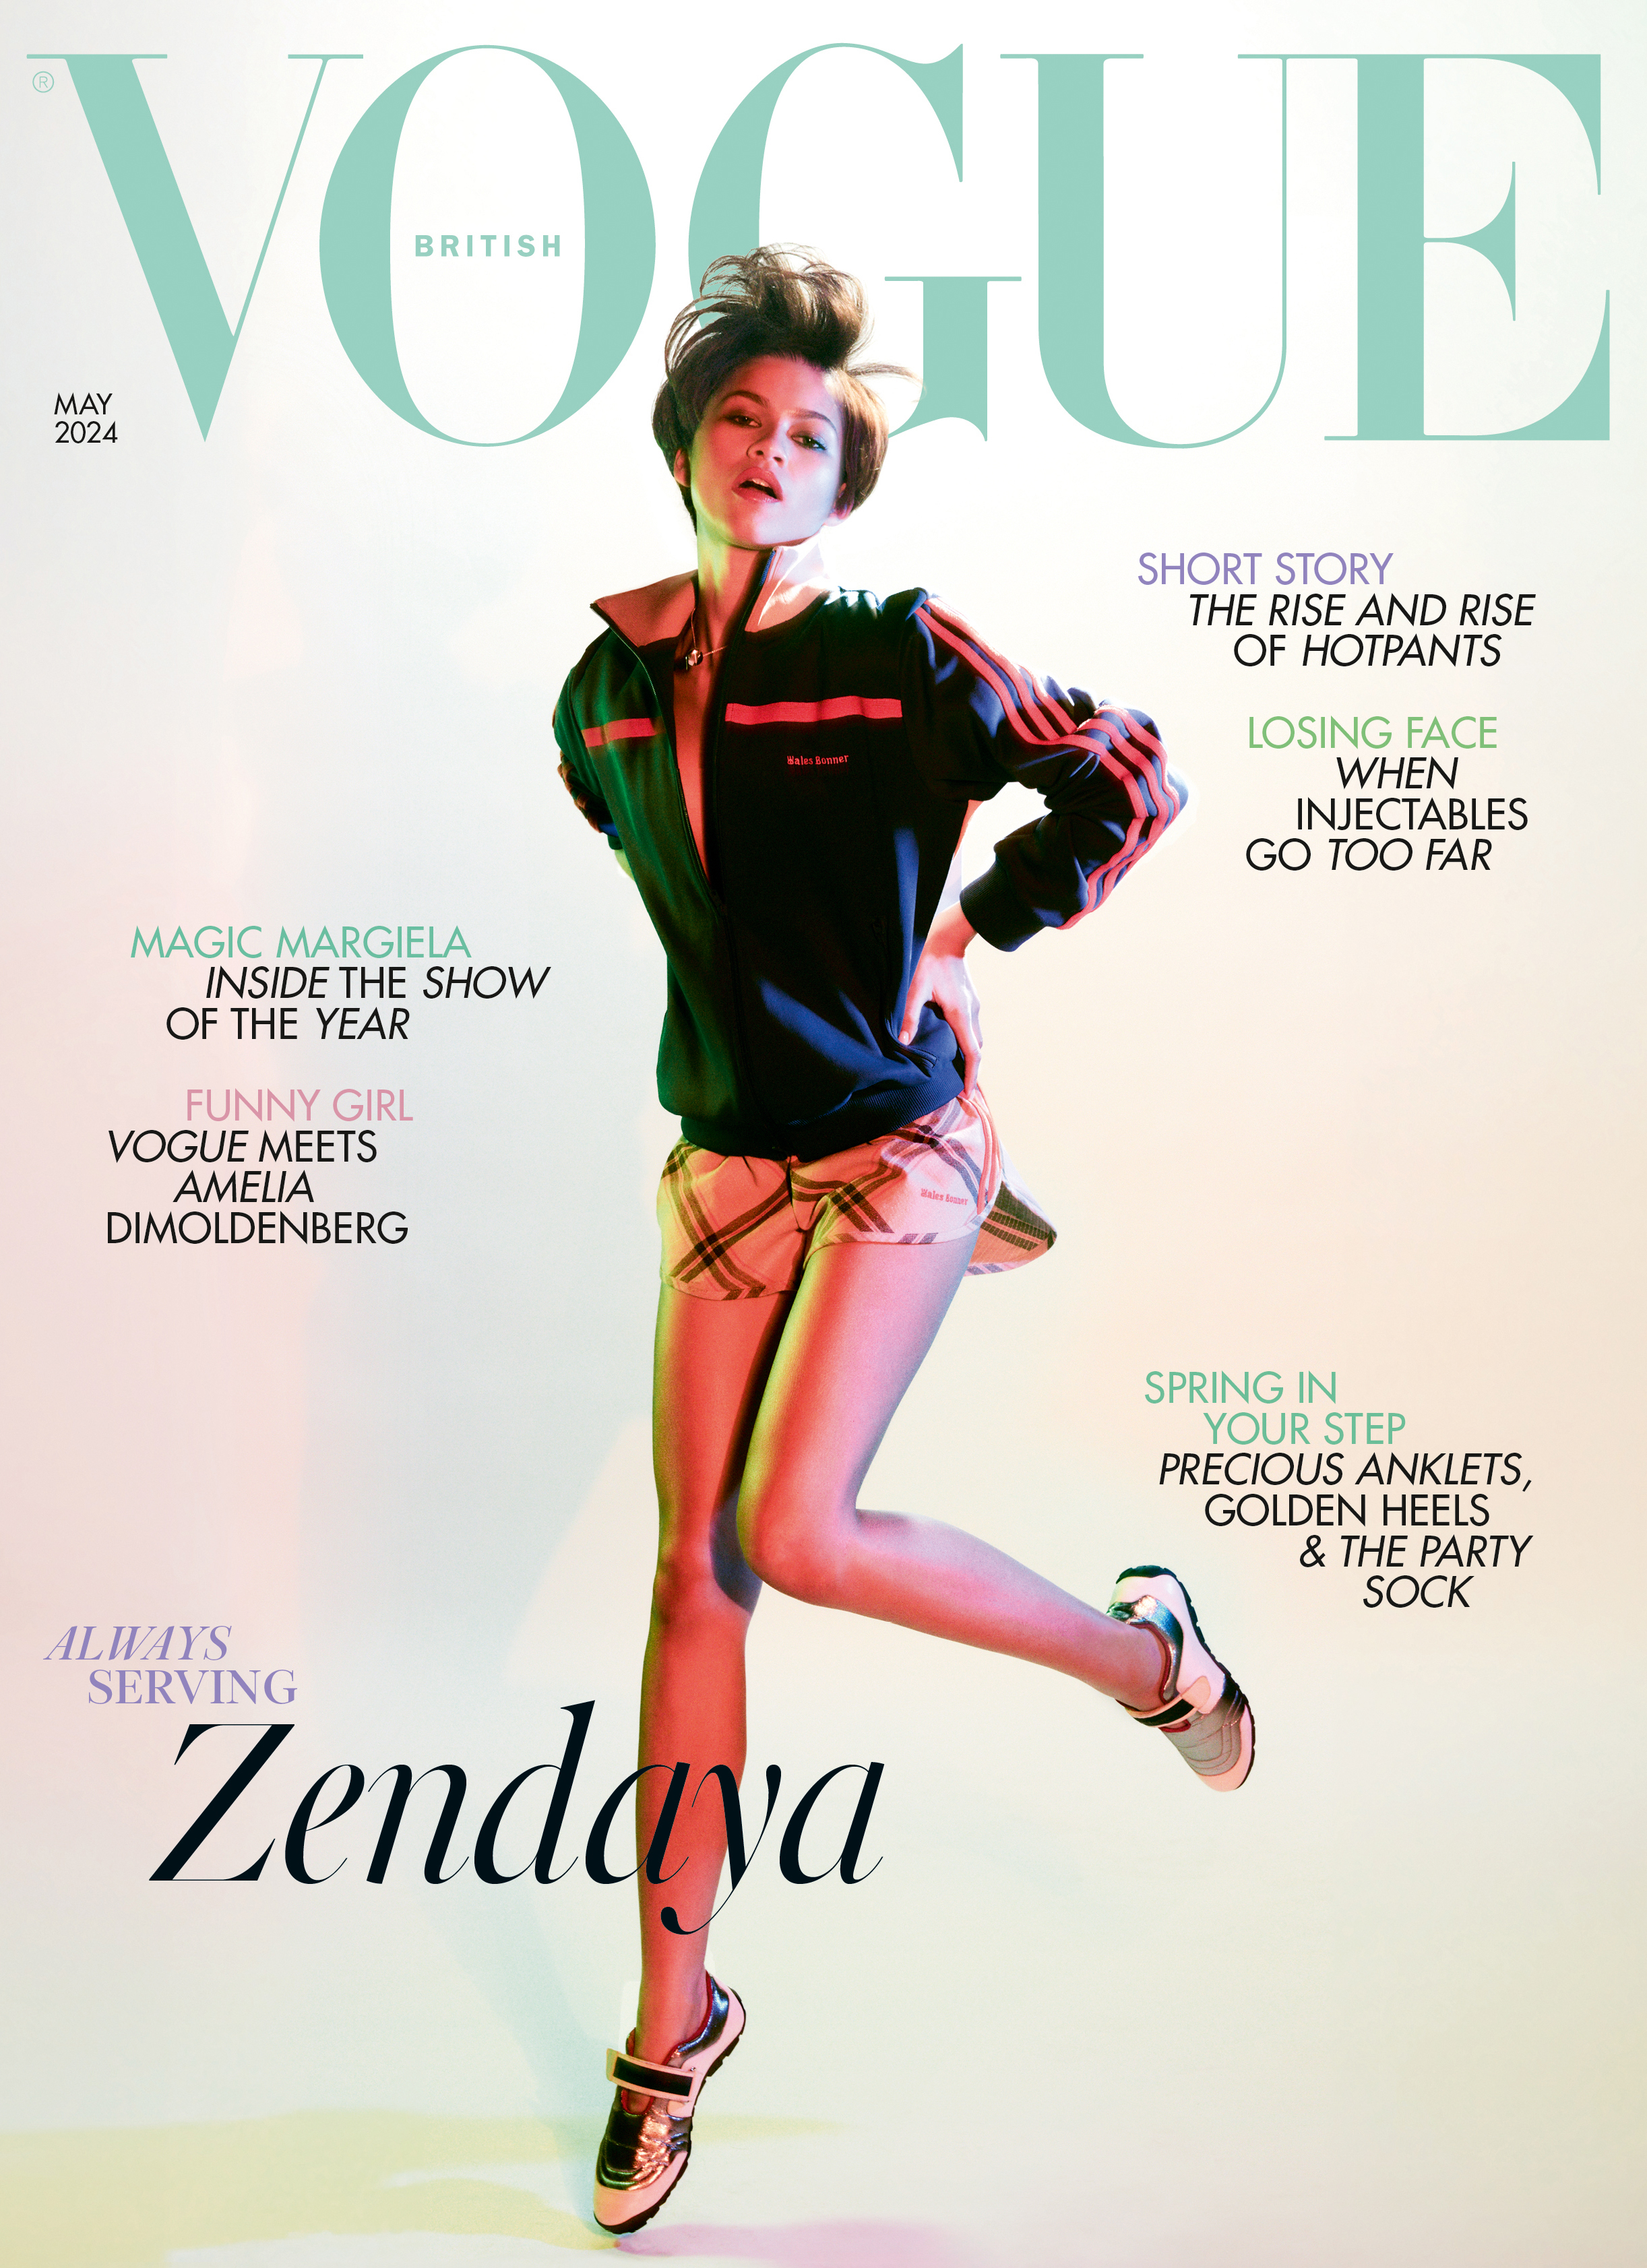 Zendaya graces the cover of the May issue of British Vogue